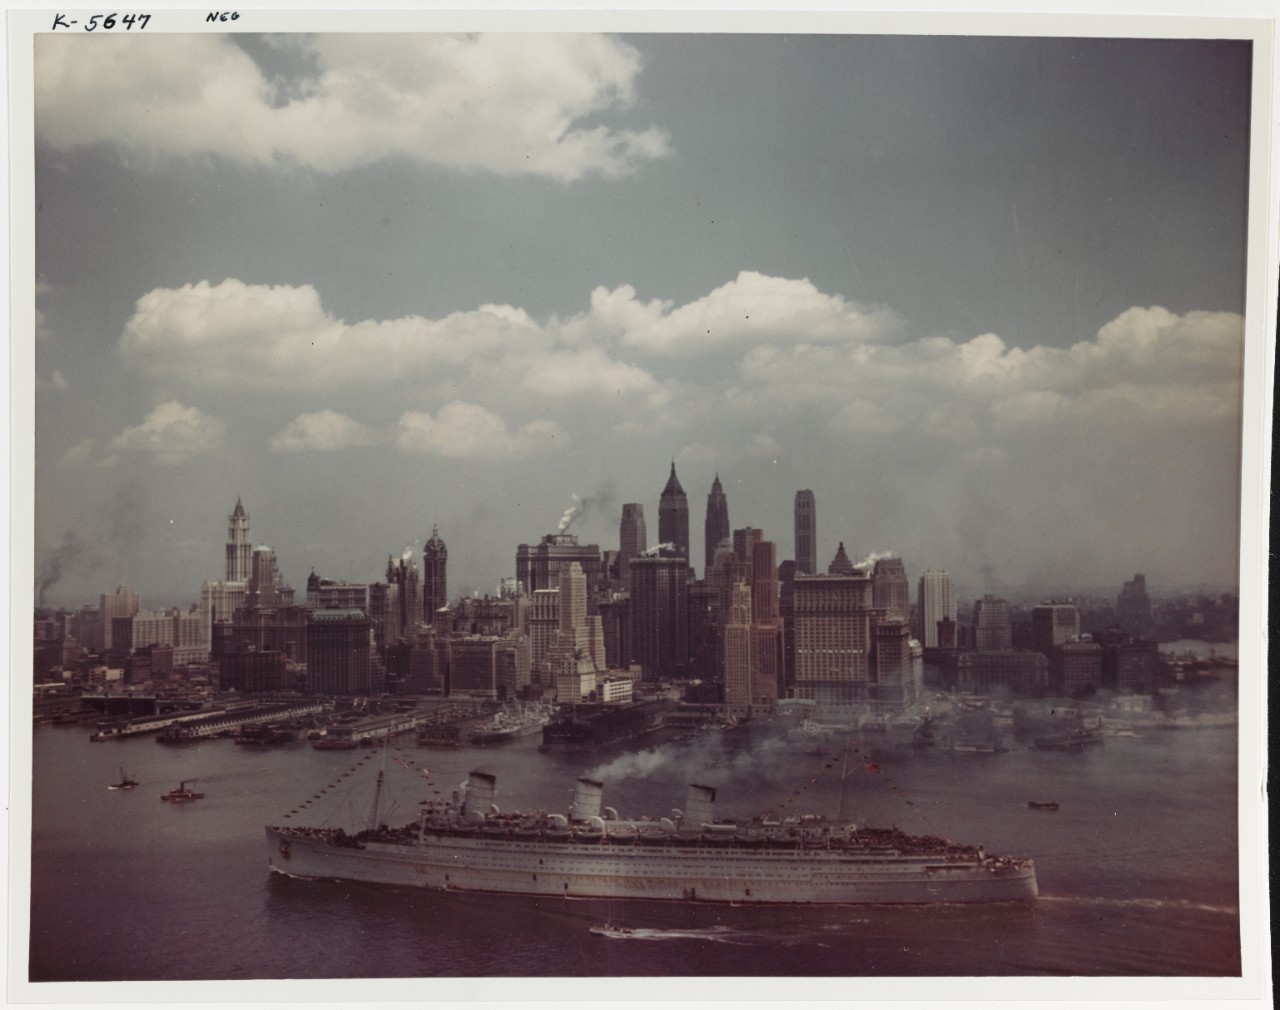 QUEEN MARY arrives in New York City, with thousands of U.S. troops on board, 20 June 1945